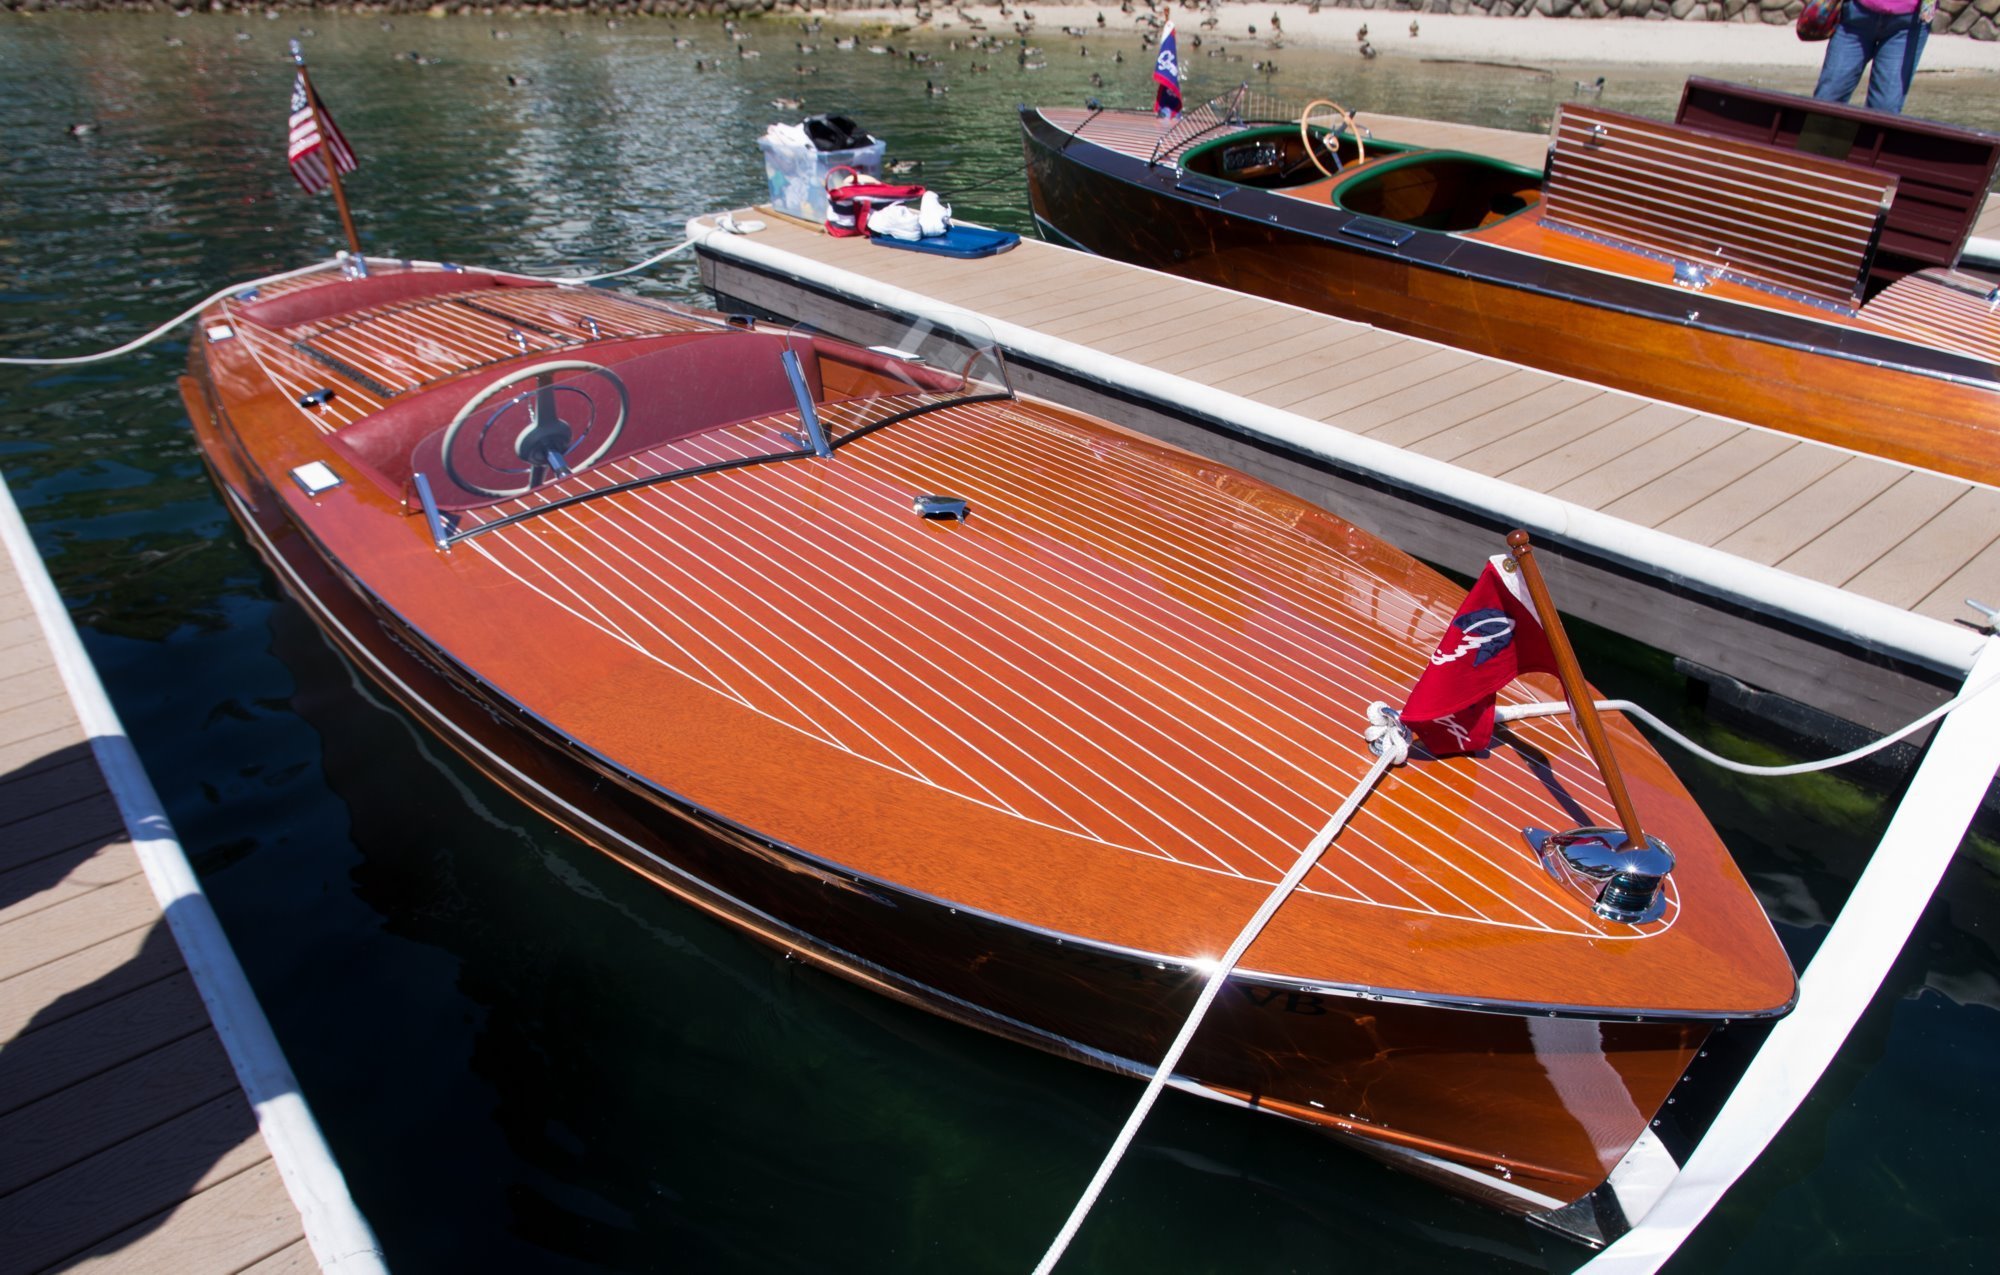 wooden boats